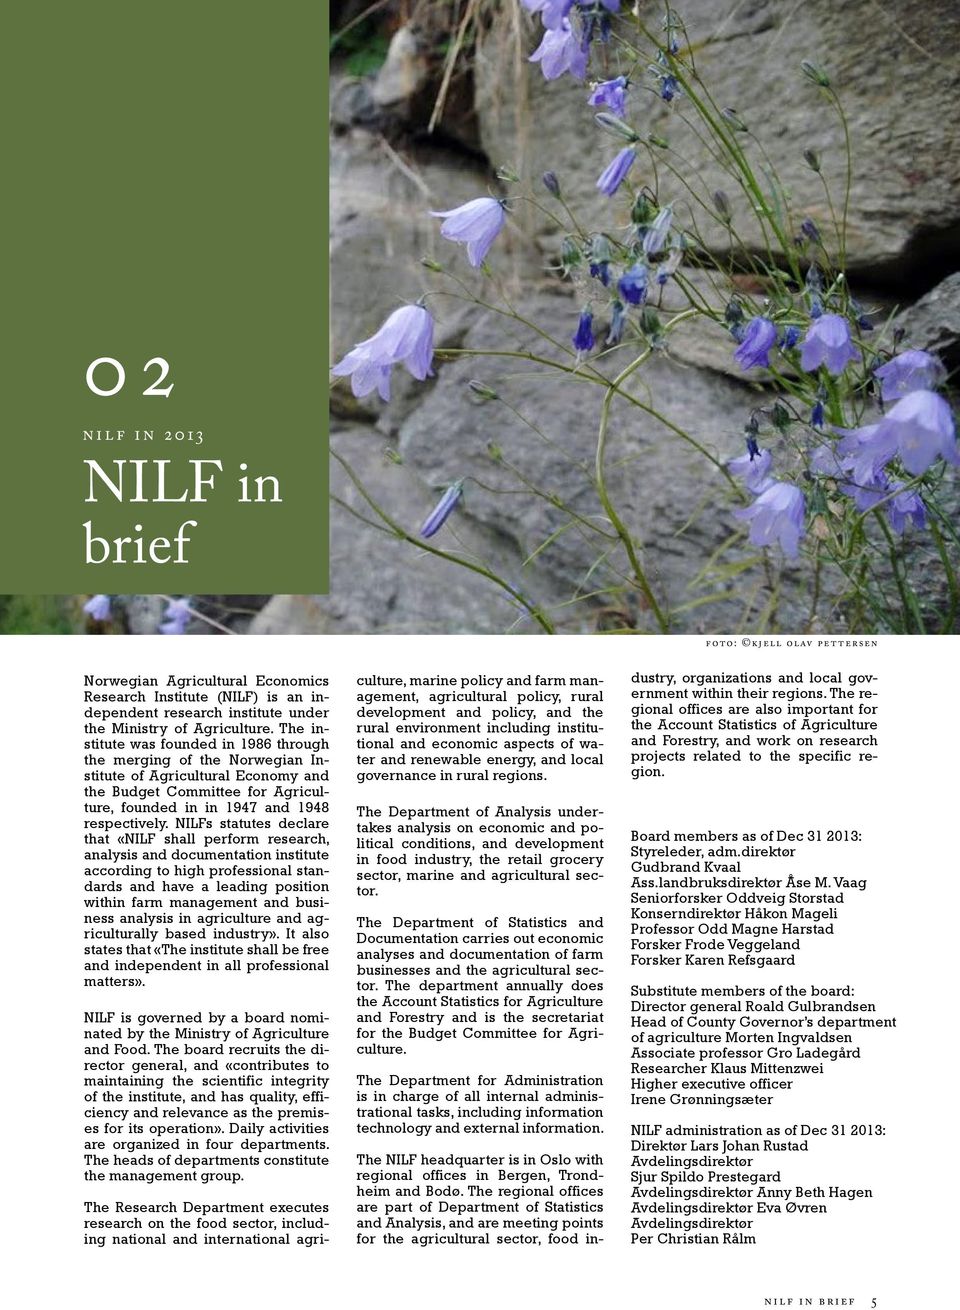 NILFs statutes declare that «NILF shall perform research, analysis and documentation institute according to high professional standards and have a leading position within farm management and business